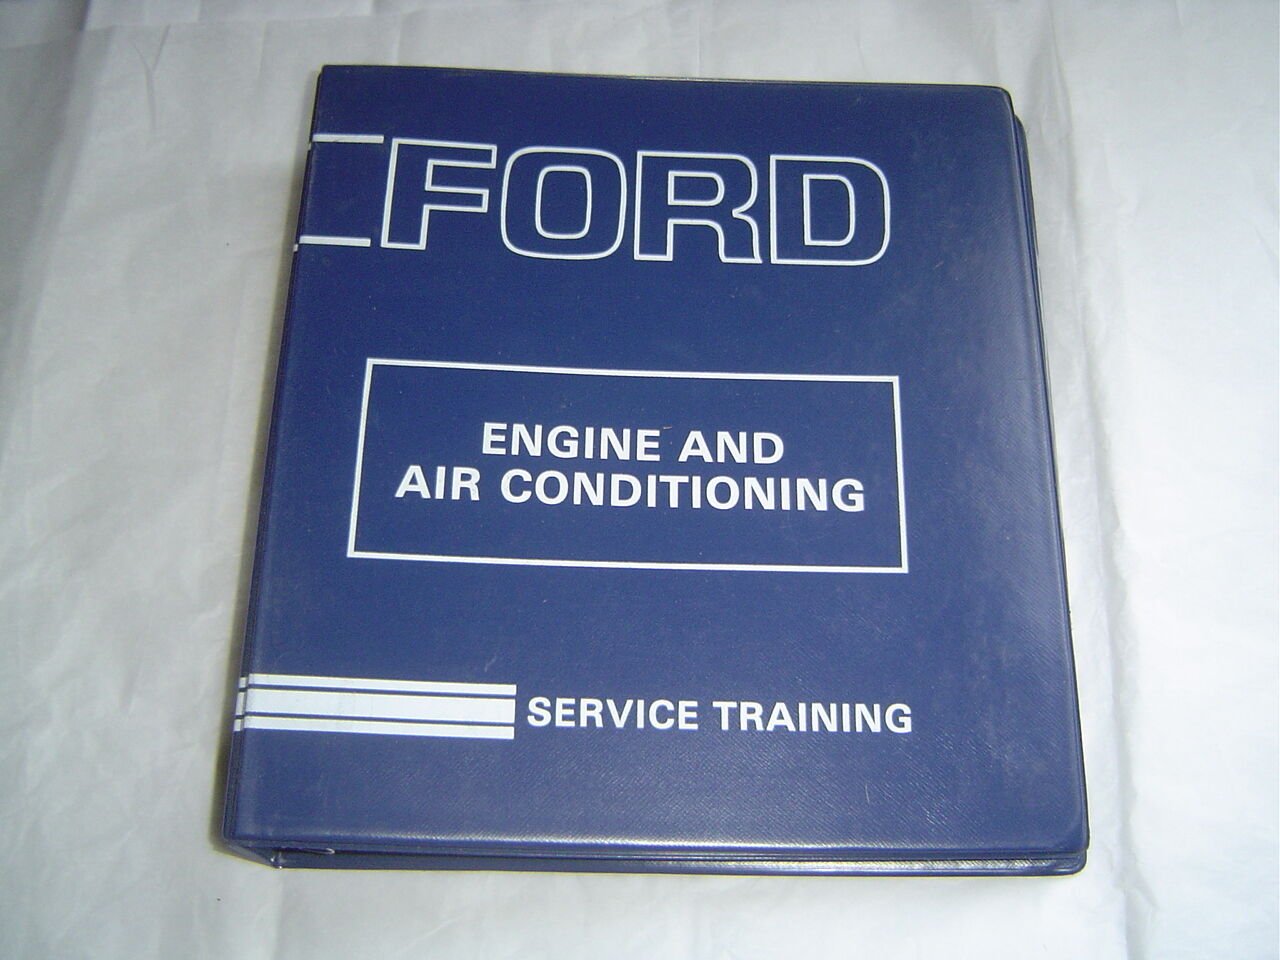 Ford TW 1020 30 5610 1100 1700 4110 4610 6610 1200 engine & AC service manual